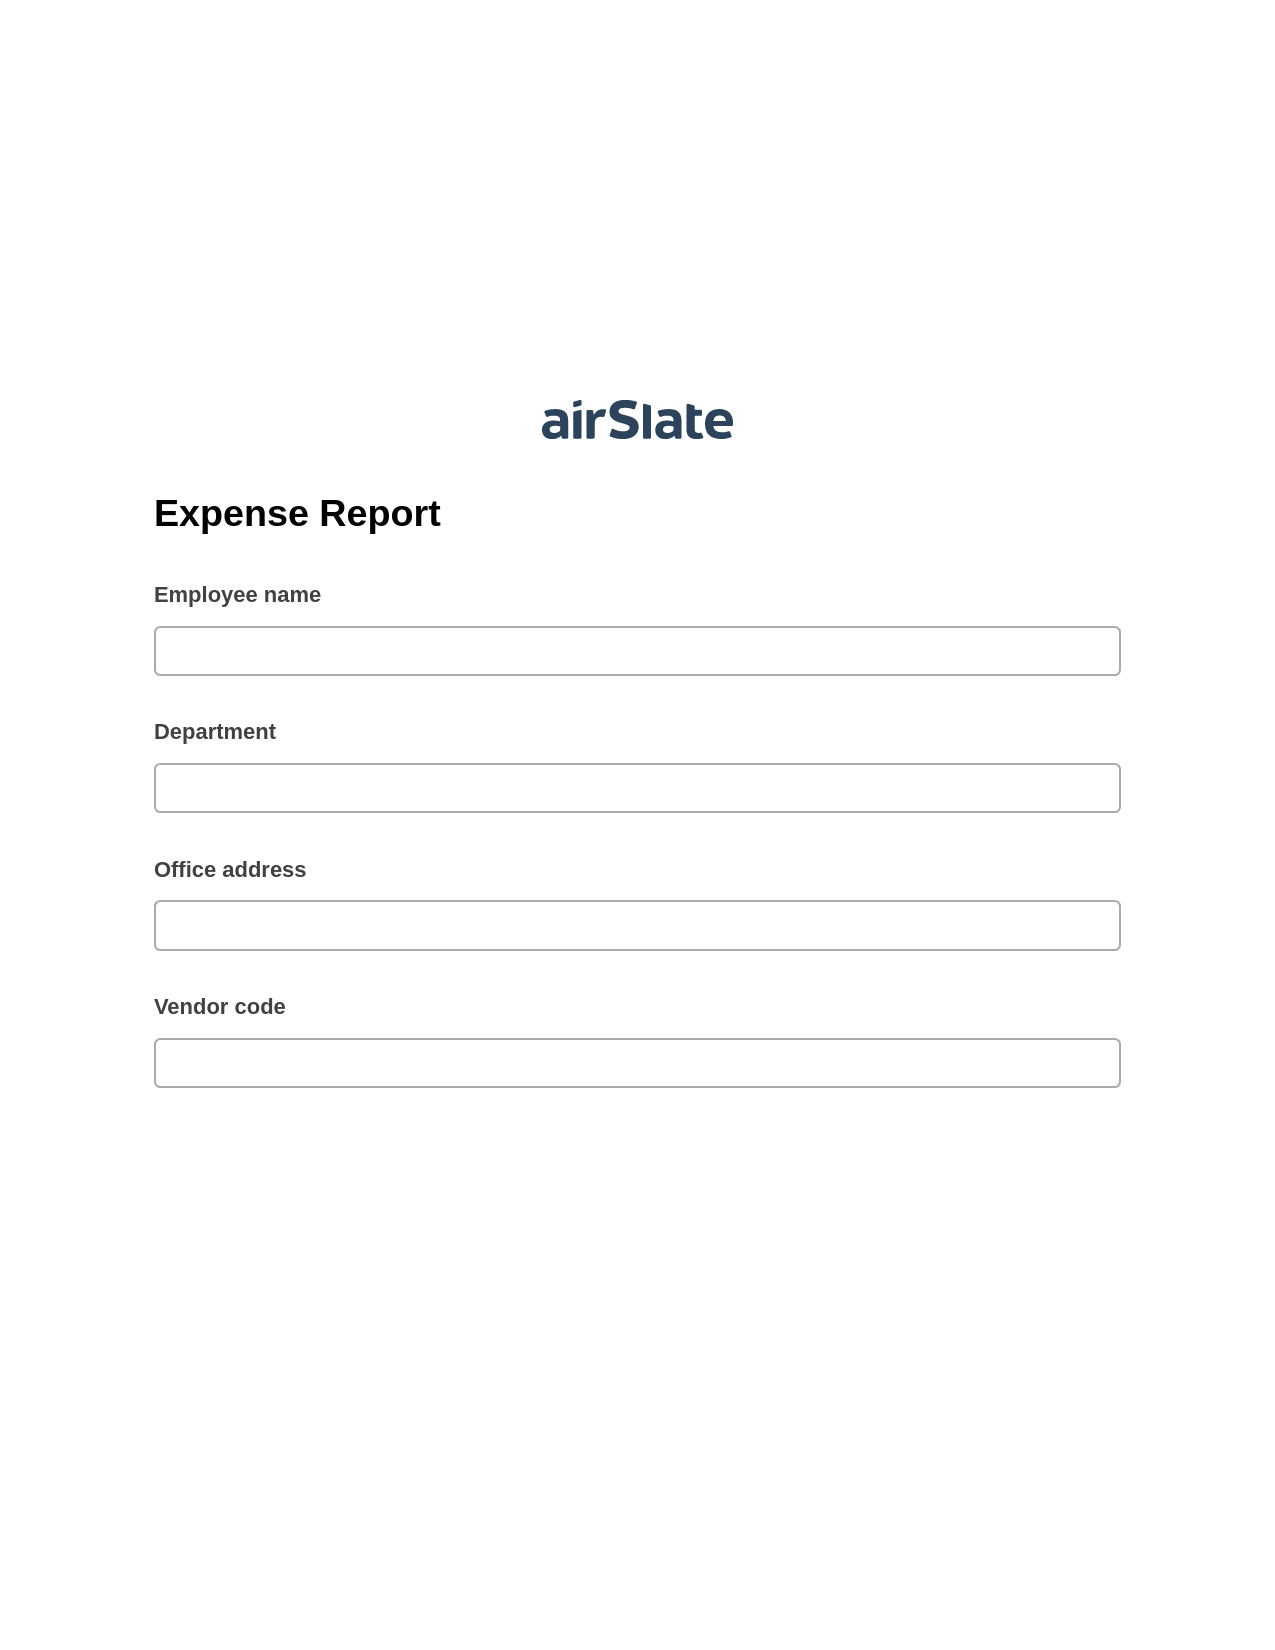 Expense Report Pre-fill from CSV File Bot, Send a Slate with Roles Bot, Export to NetSuite Record Bot